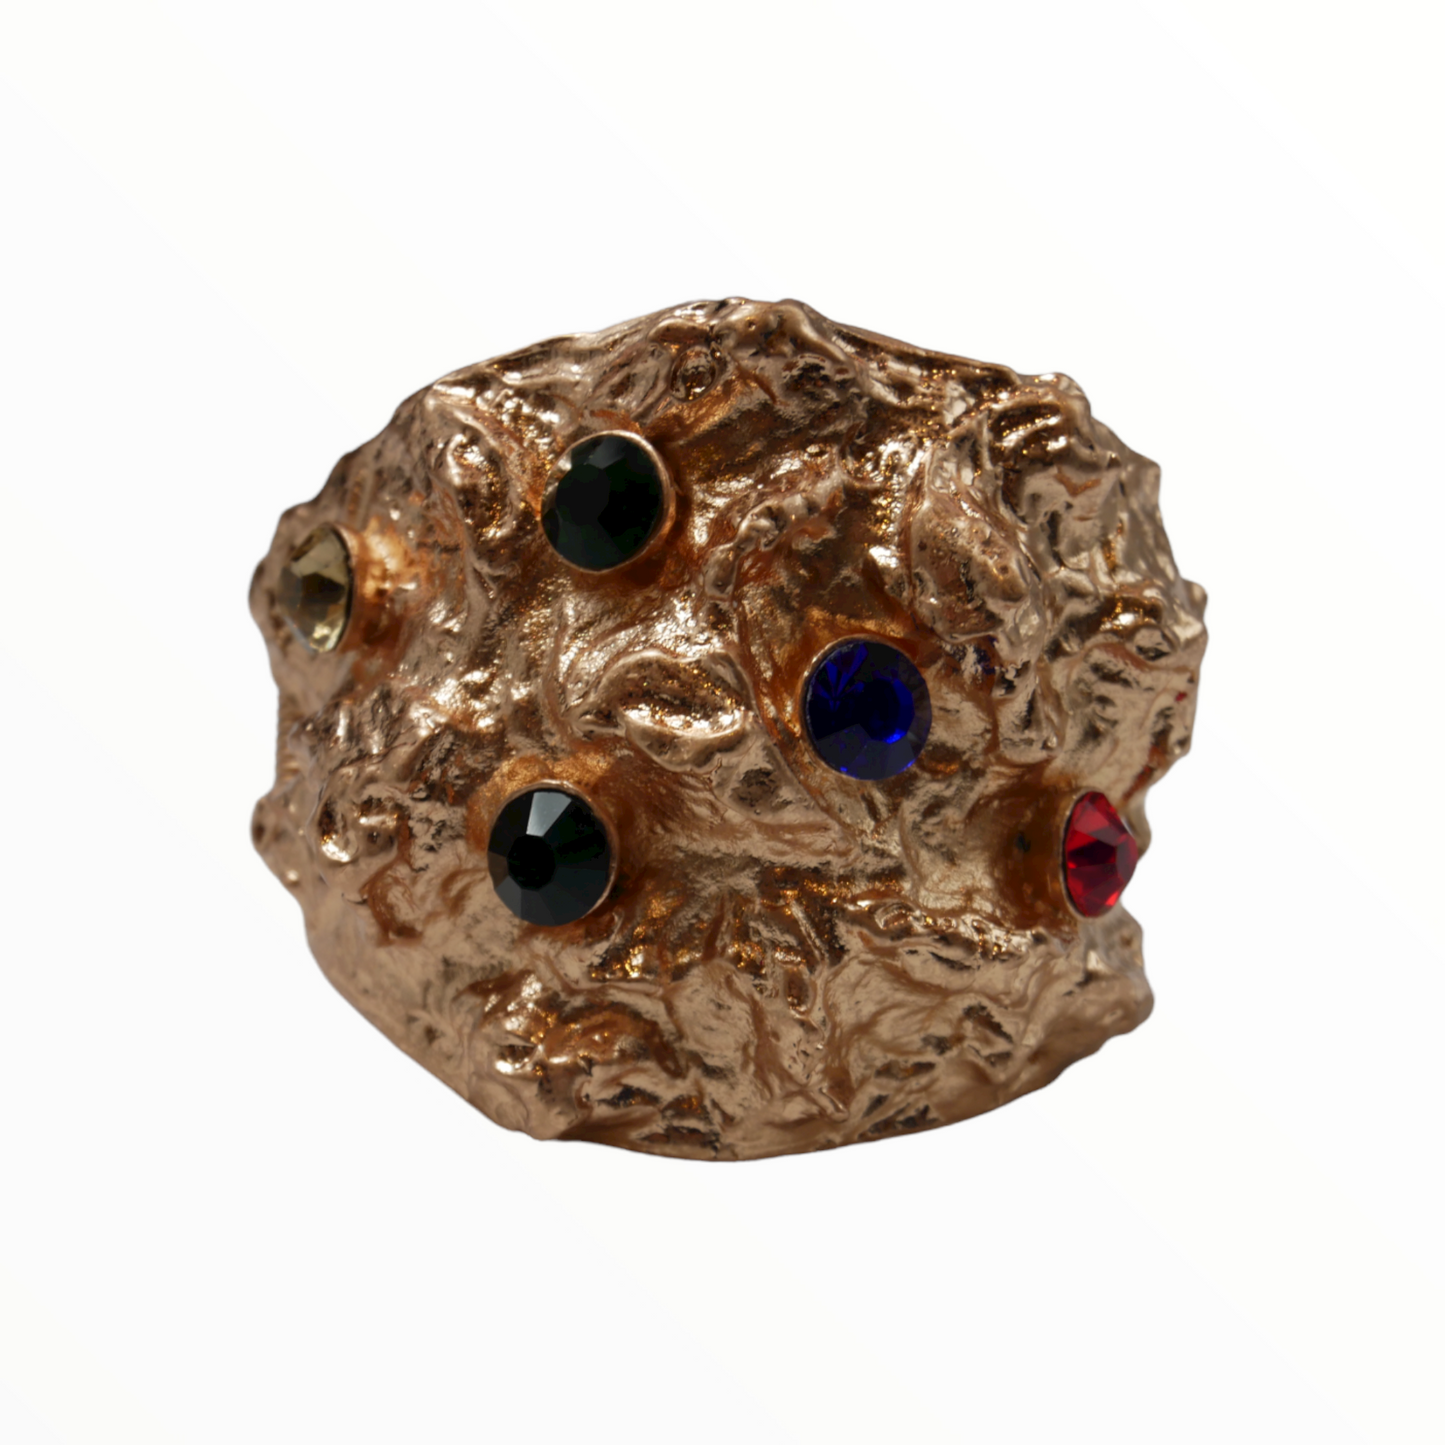 Vintage cuff in gold with 4 different colored stones - 1990s